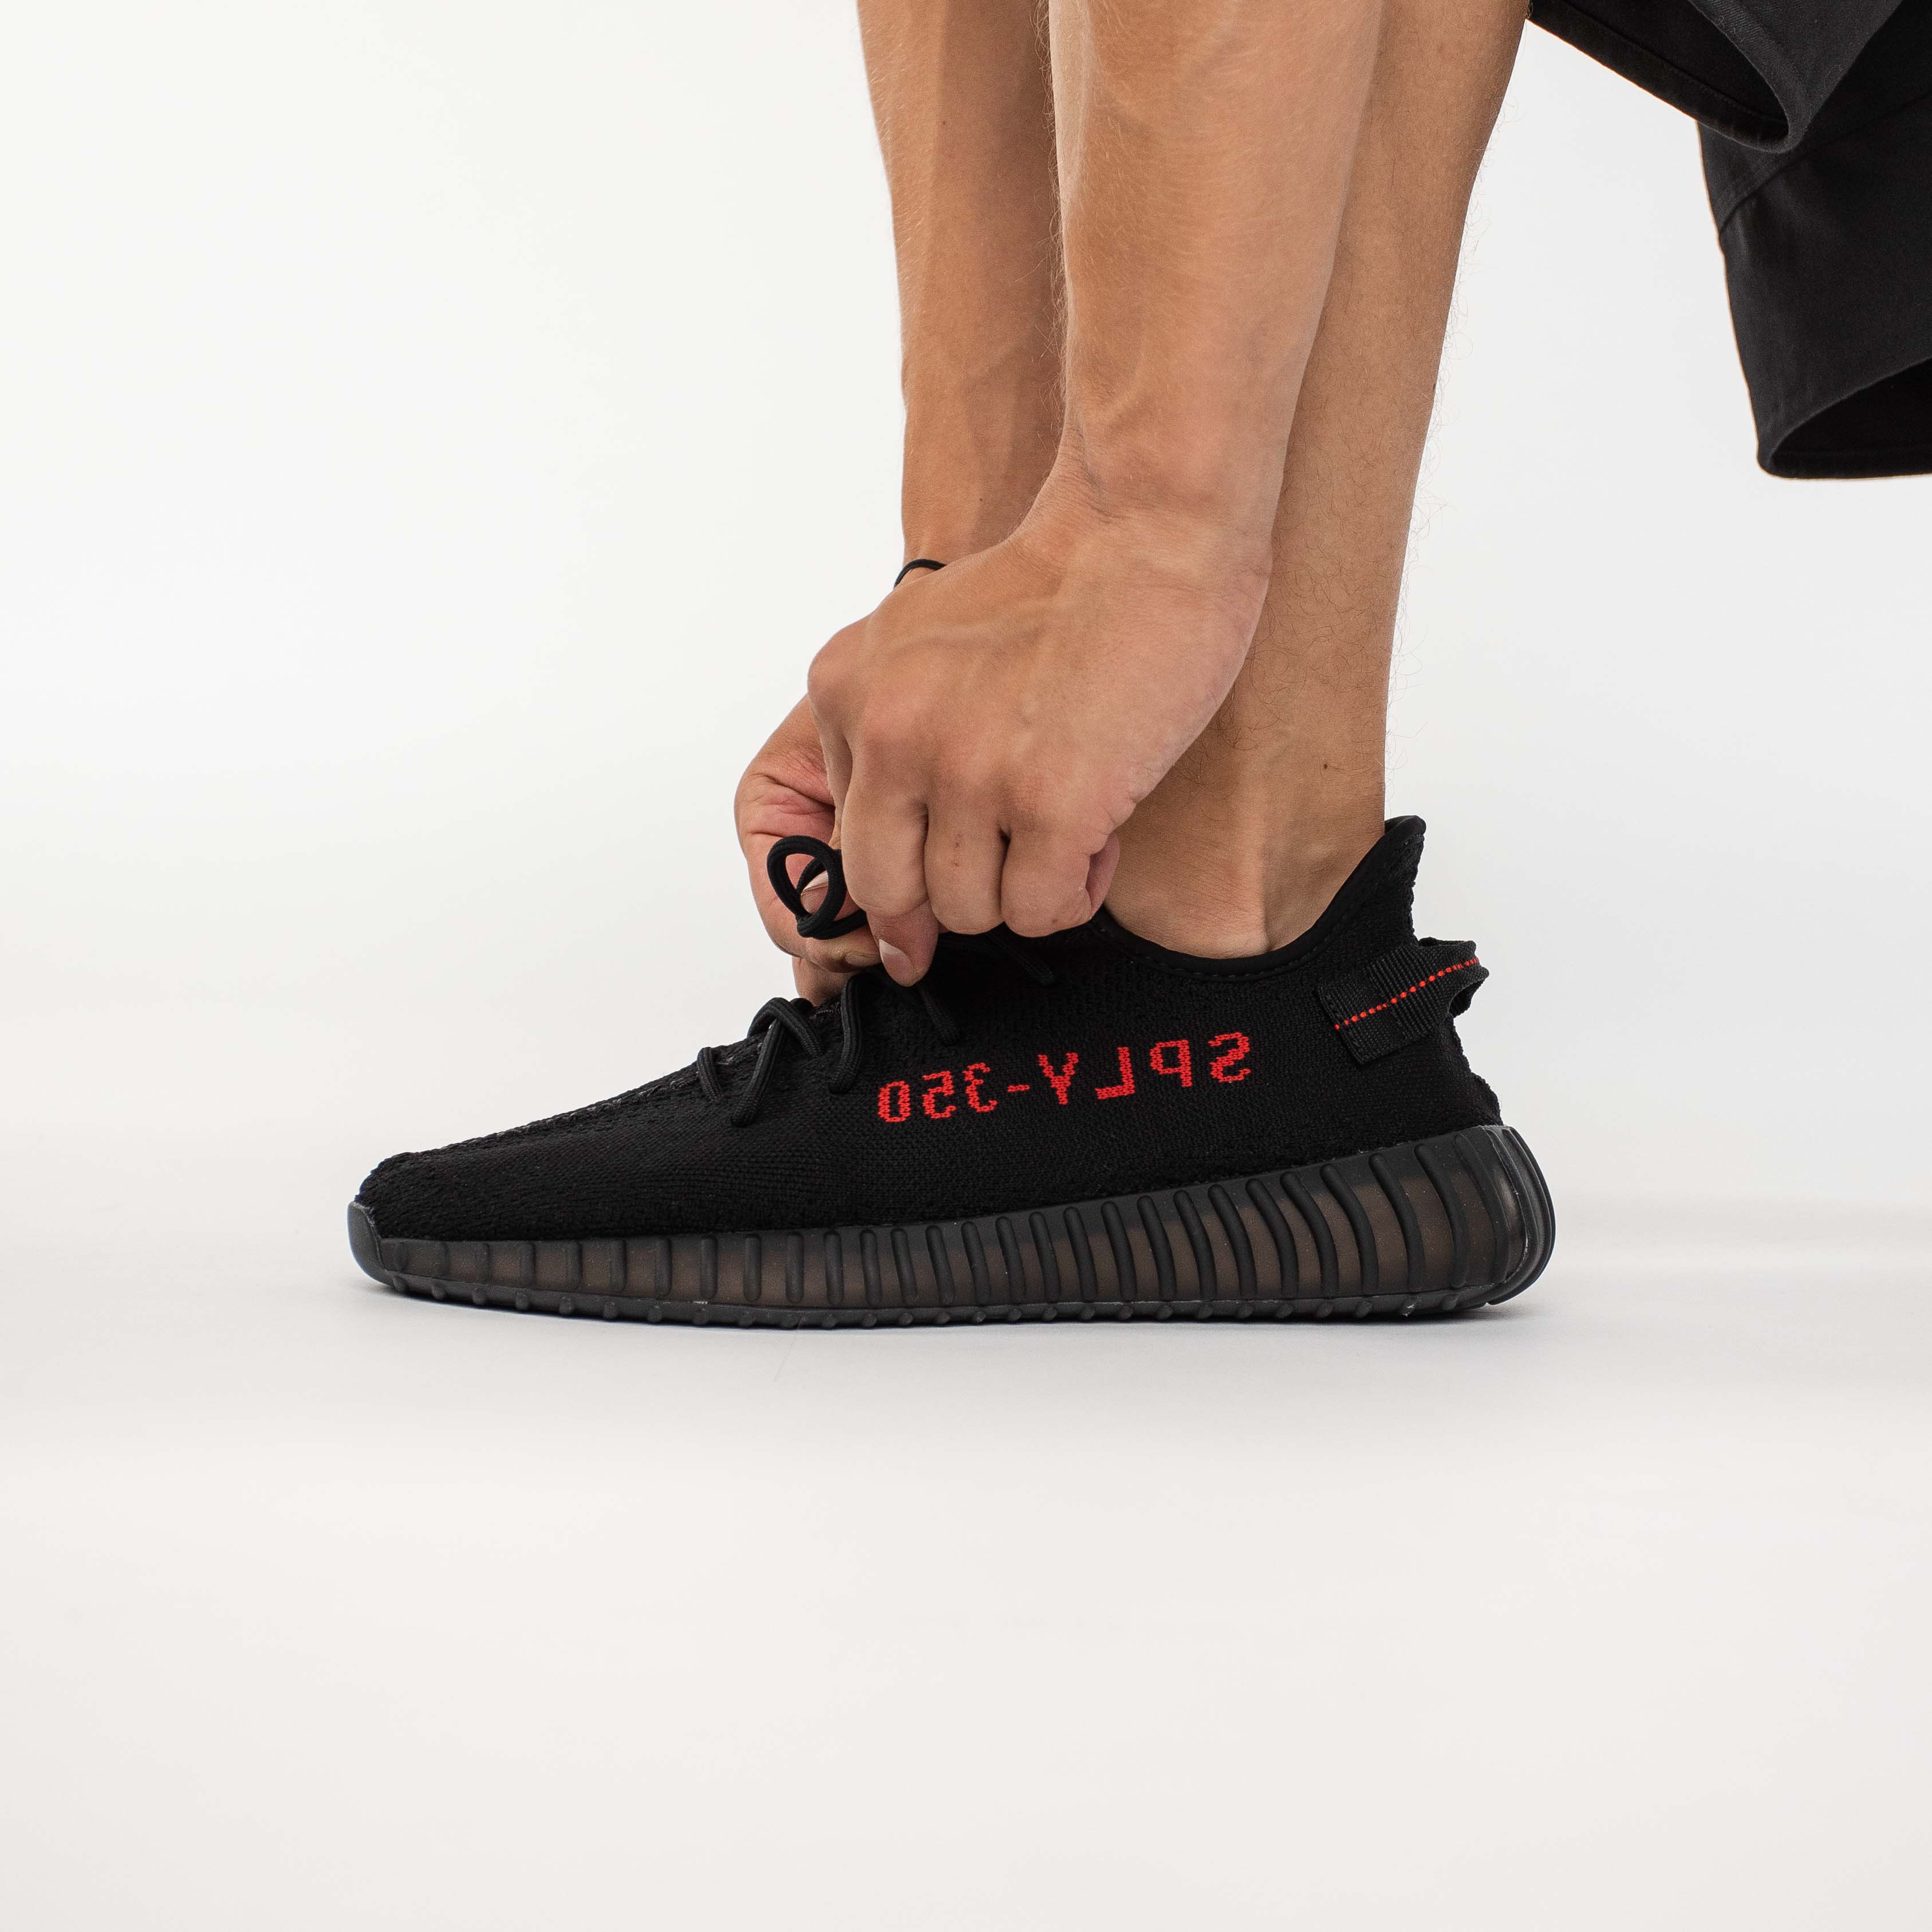 Yeezy Boost 350 V2 Black Red - SYRUP